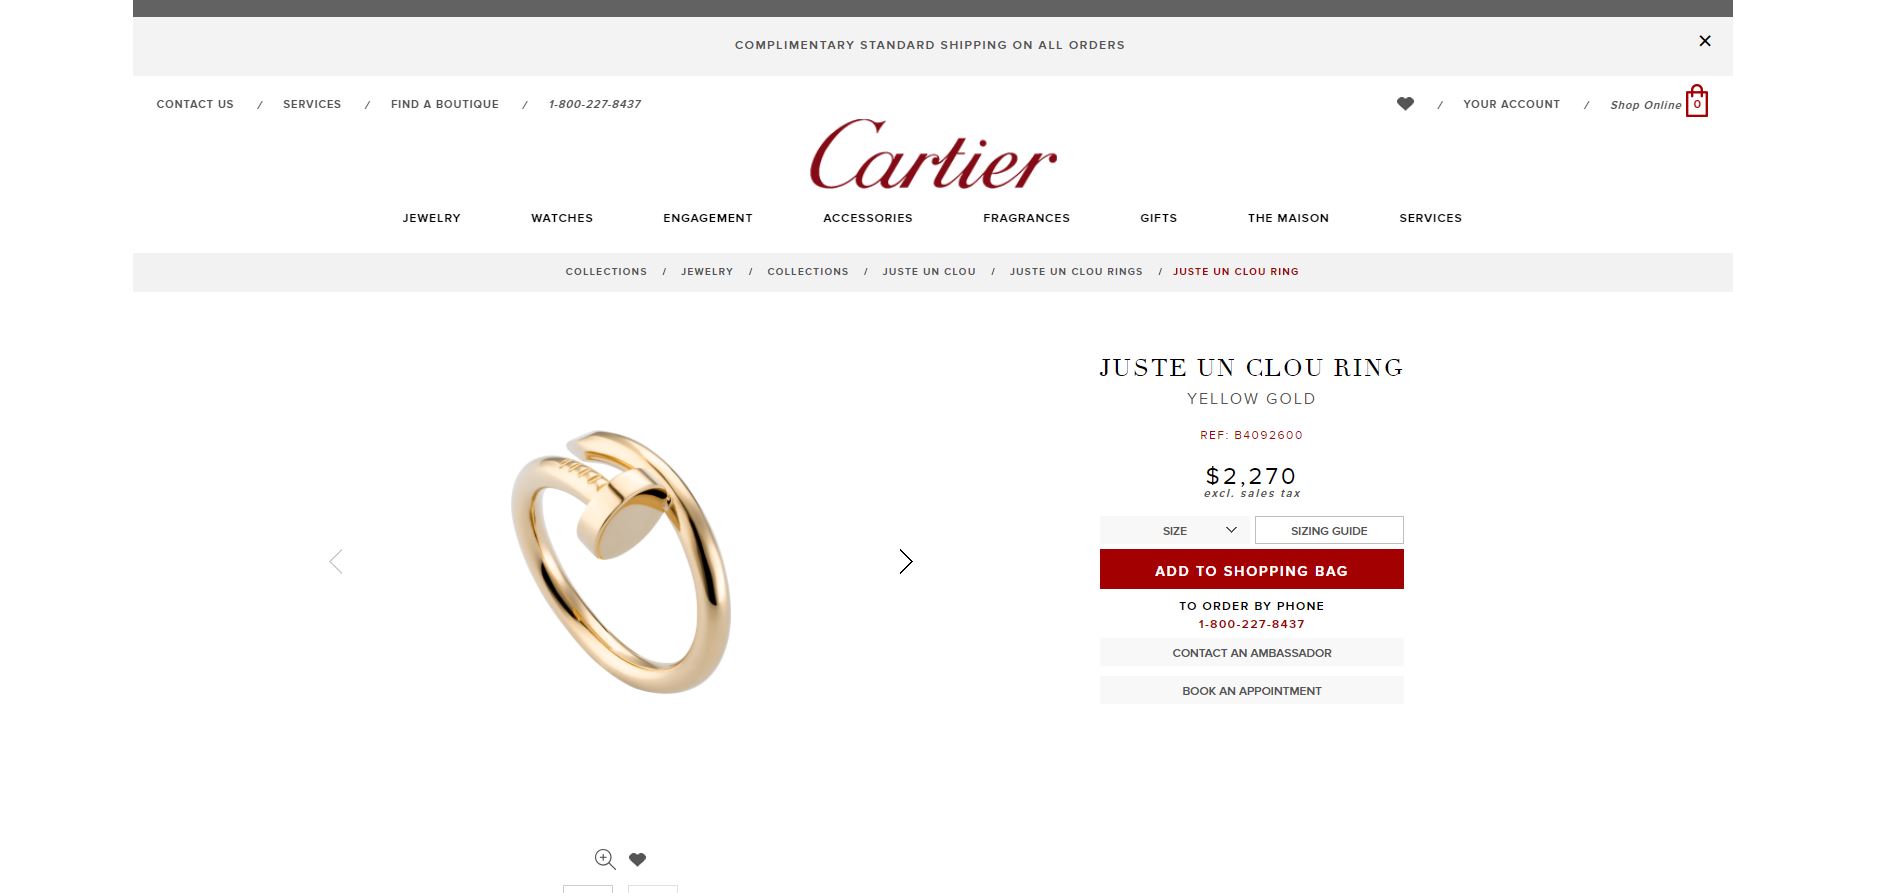 2017-12-11 15_34_05-CRB4092600 - Juste un Clou ring - Yellow gold - Cartier